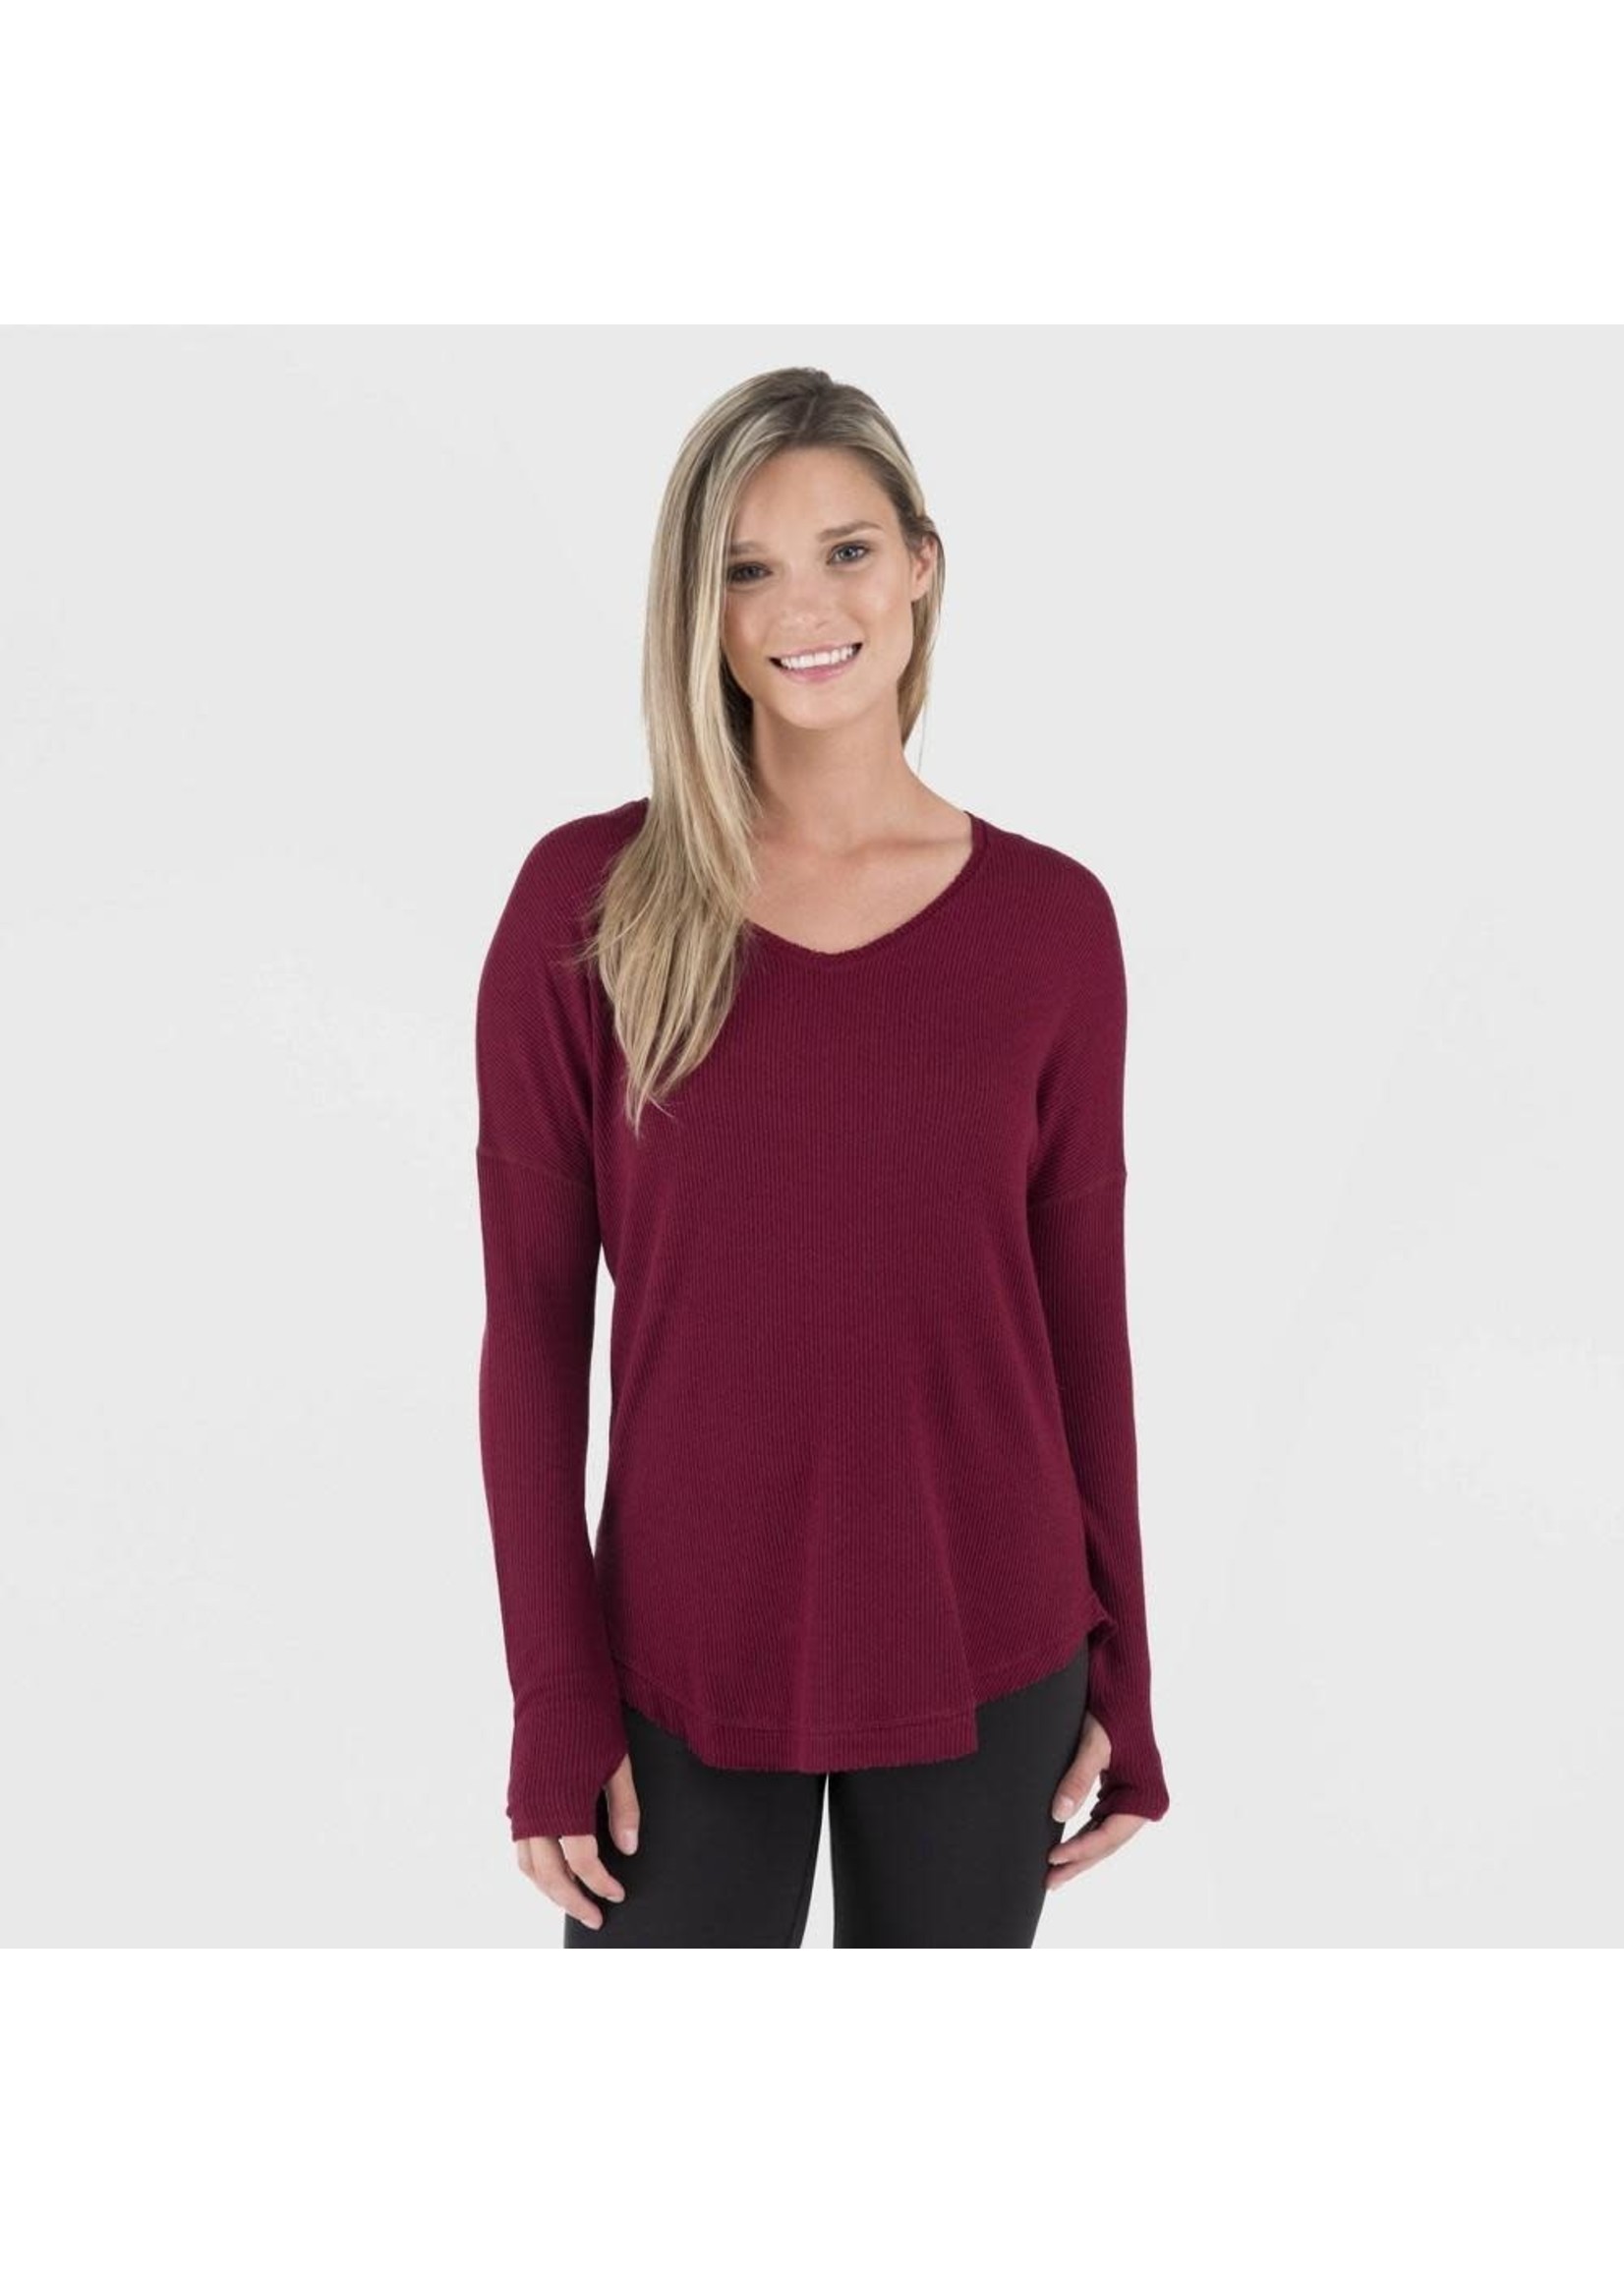 Wander by Hottotties Women's Waffle Collection Lea Long Sleeve V-Neck - Pomegranate Pink L